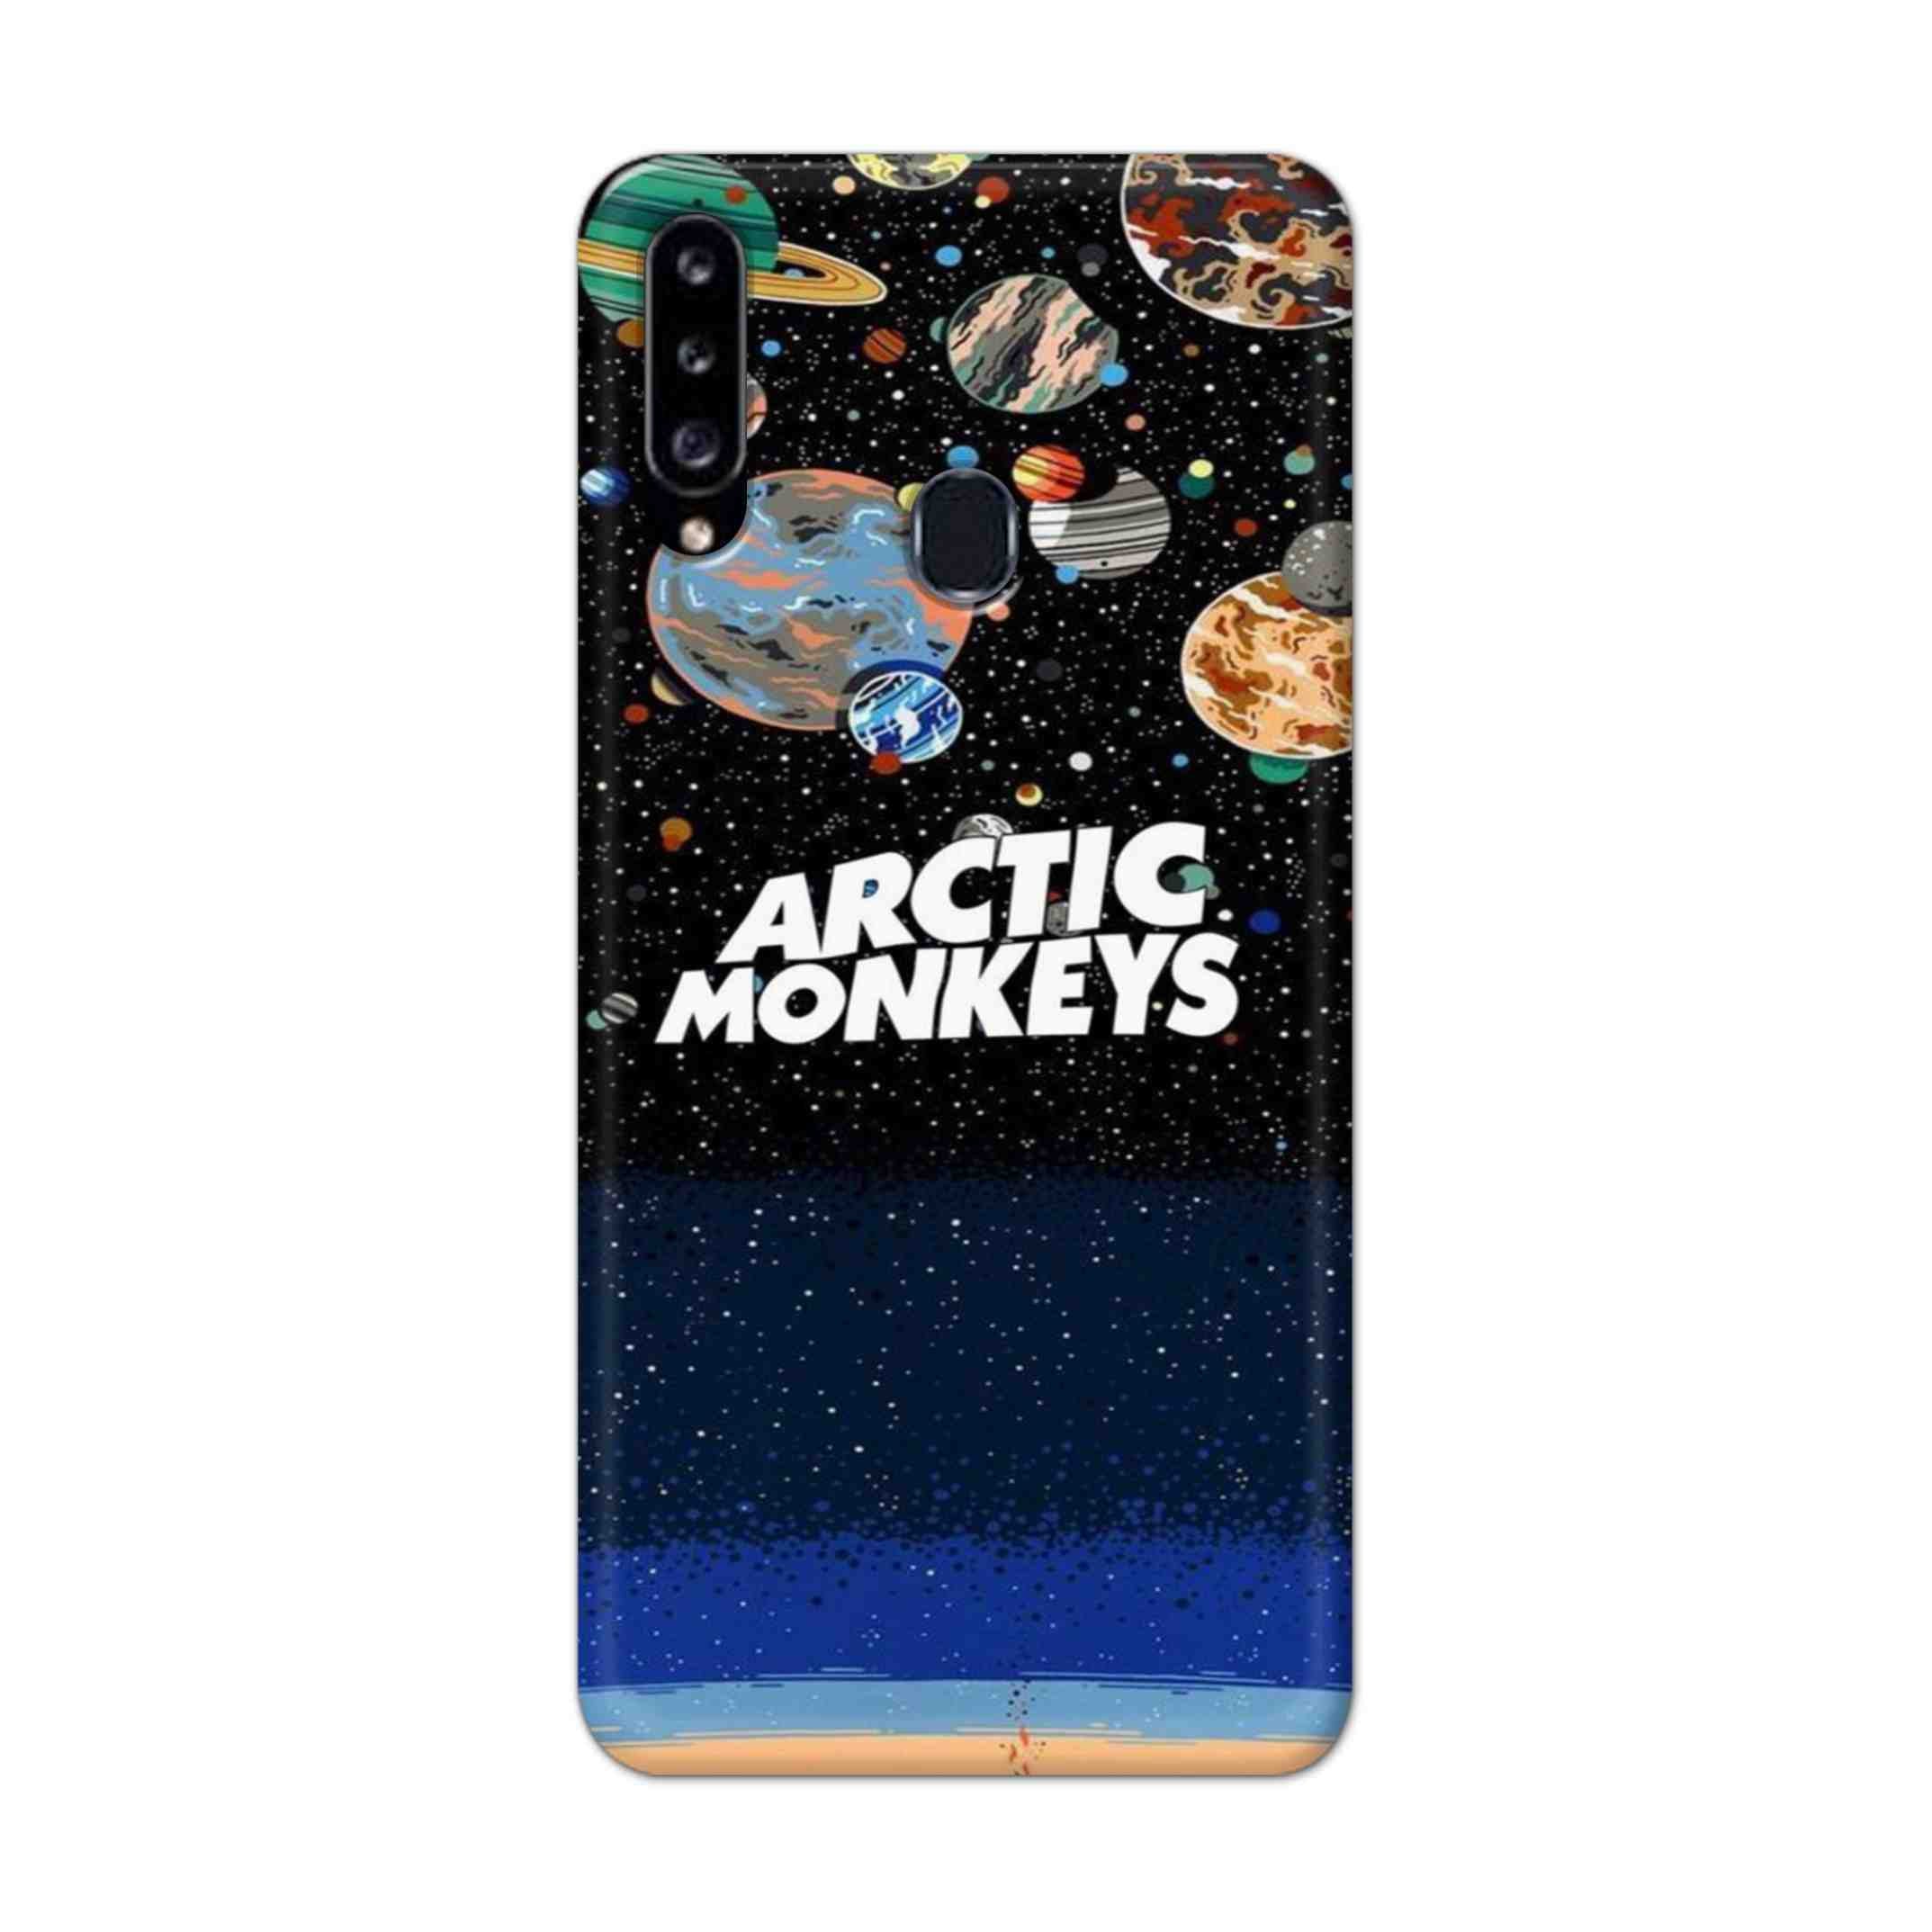 Buy Artic Monkeys Hard Back Mobile Phone Case Cover For Samsung Galaxy A21 Online